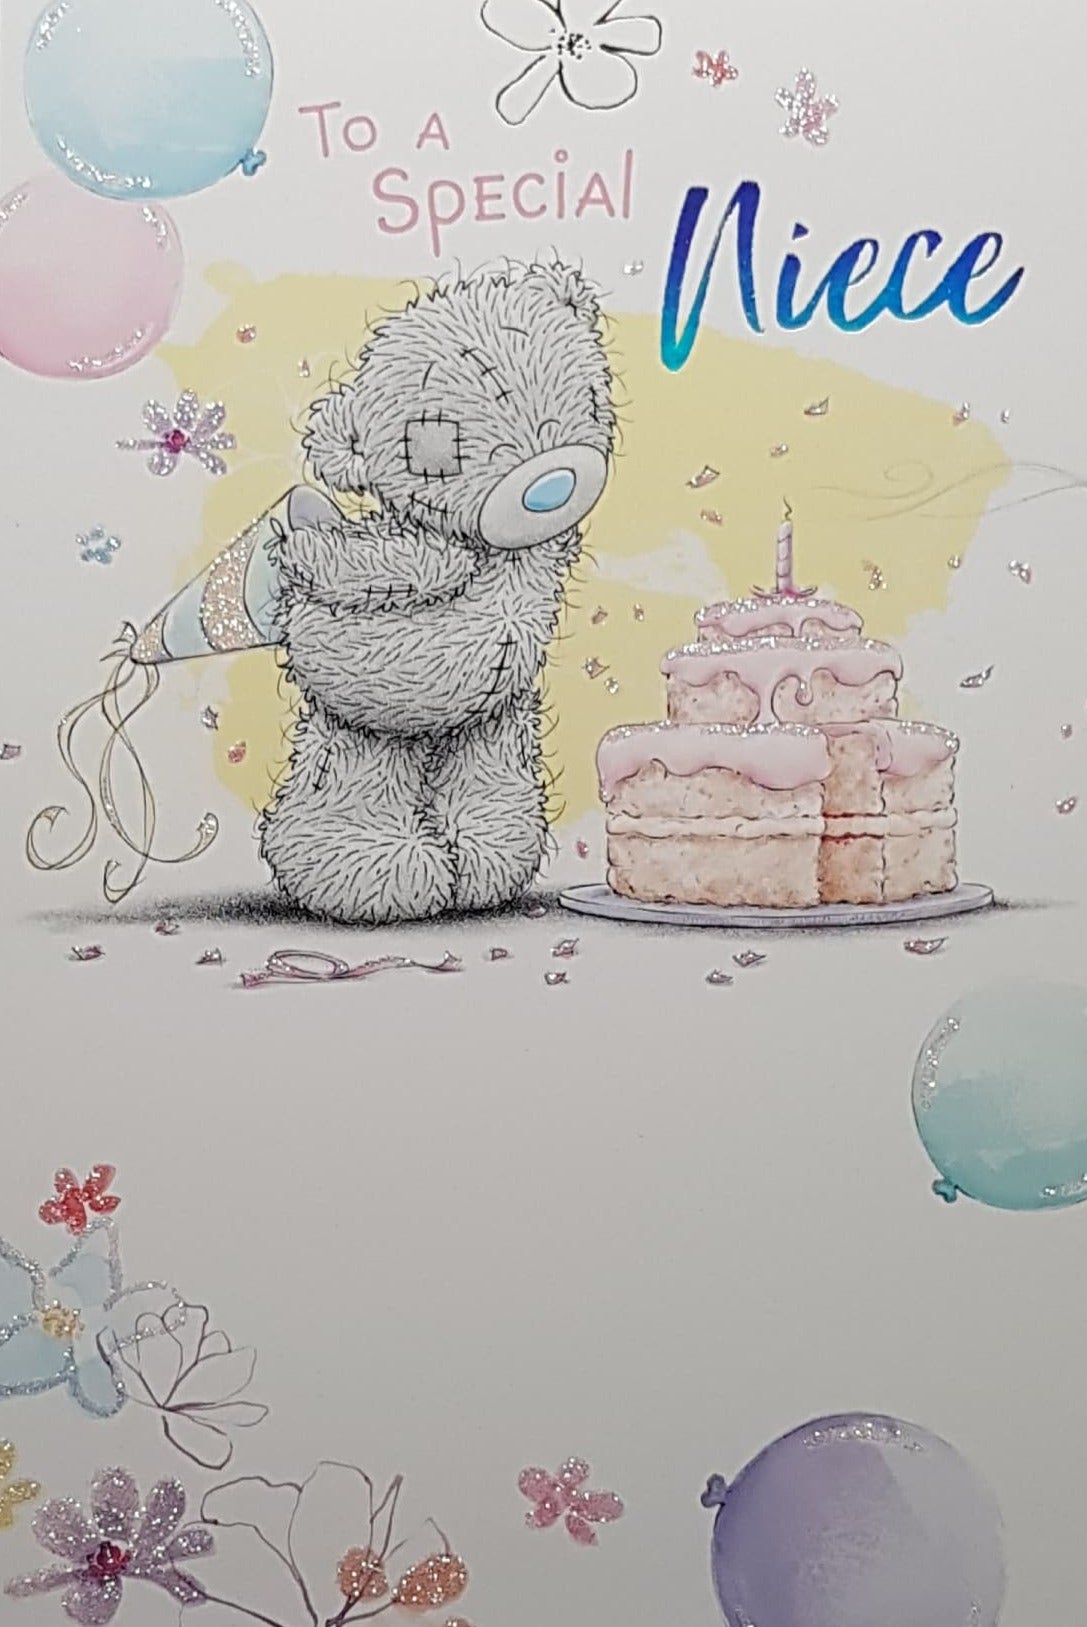 Birthday Card - Niece / Teddy Holding A Party Hat Looking At A Pink Cake